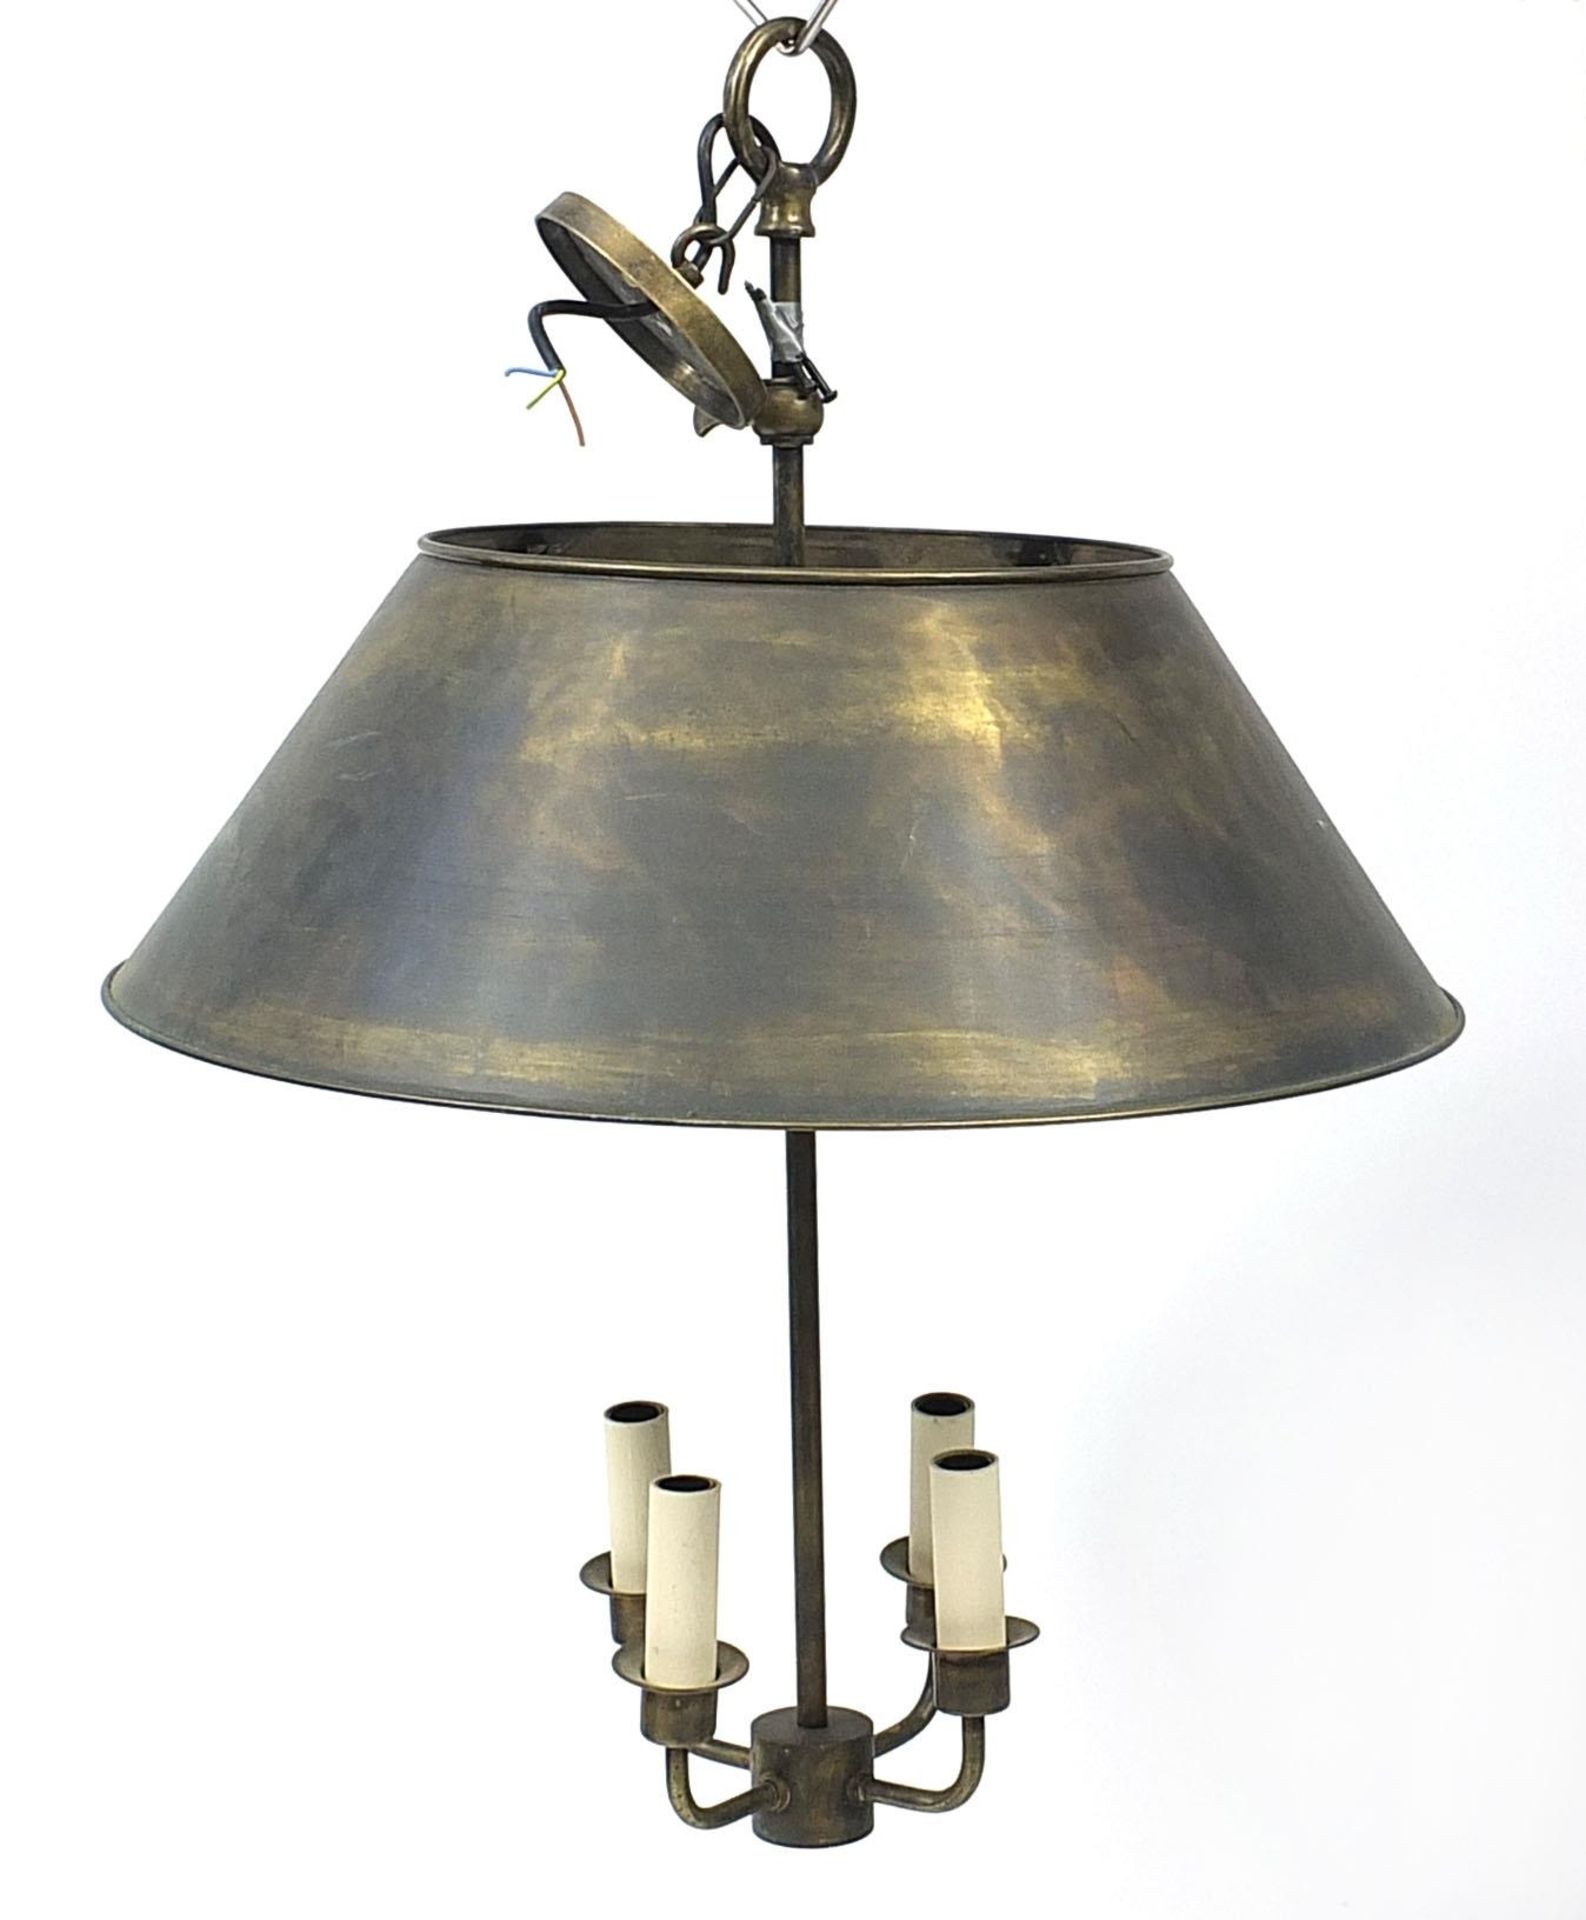 Brass four branch light pendant with shade, 74cm high - Image 2 of 3